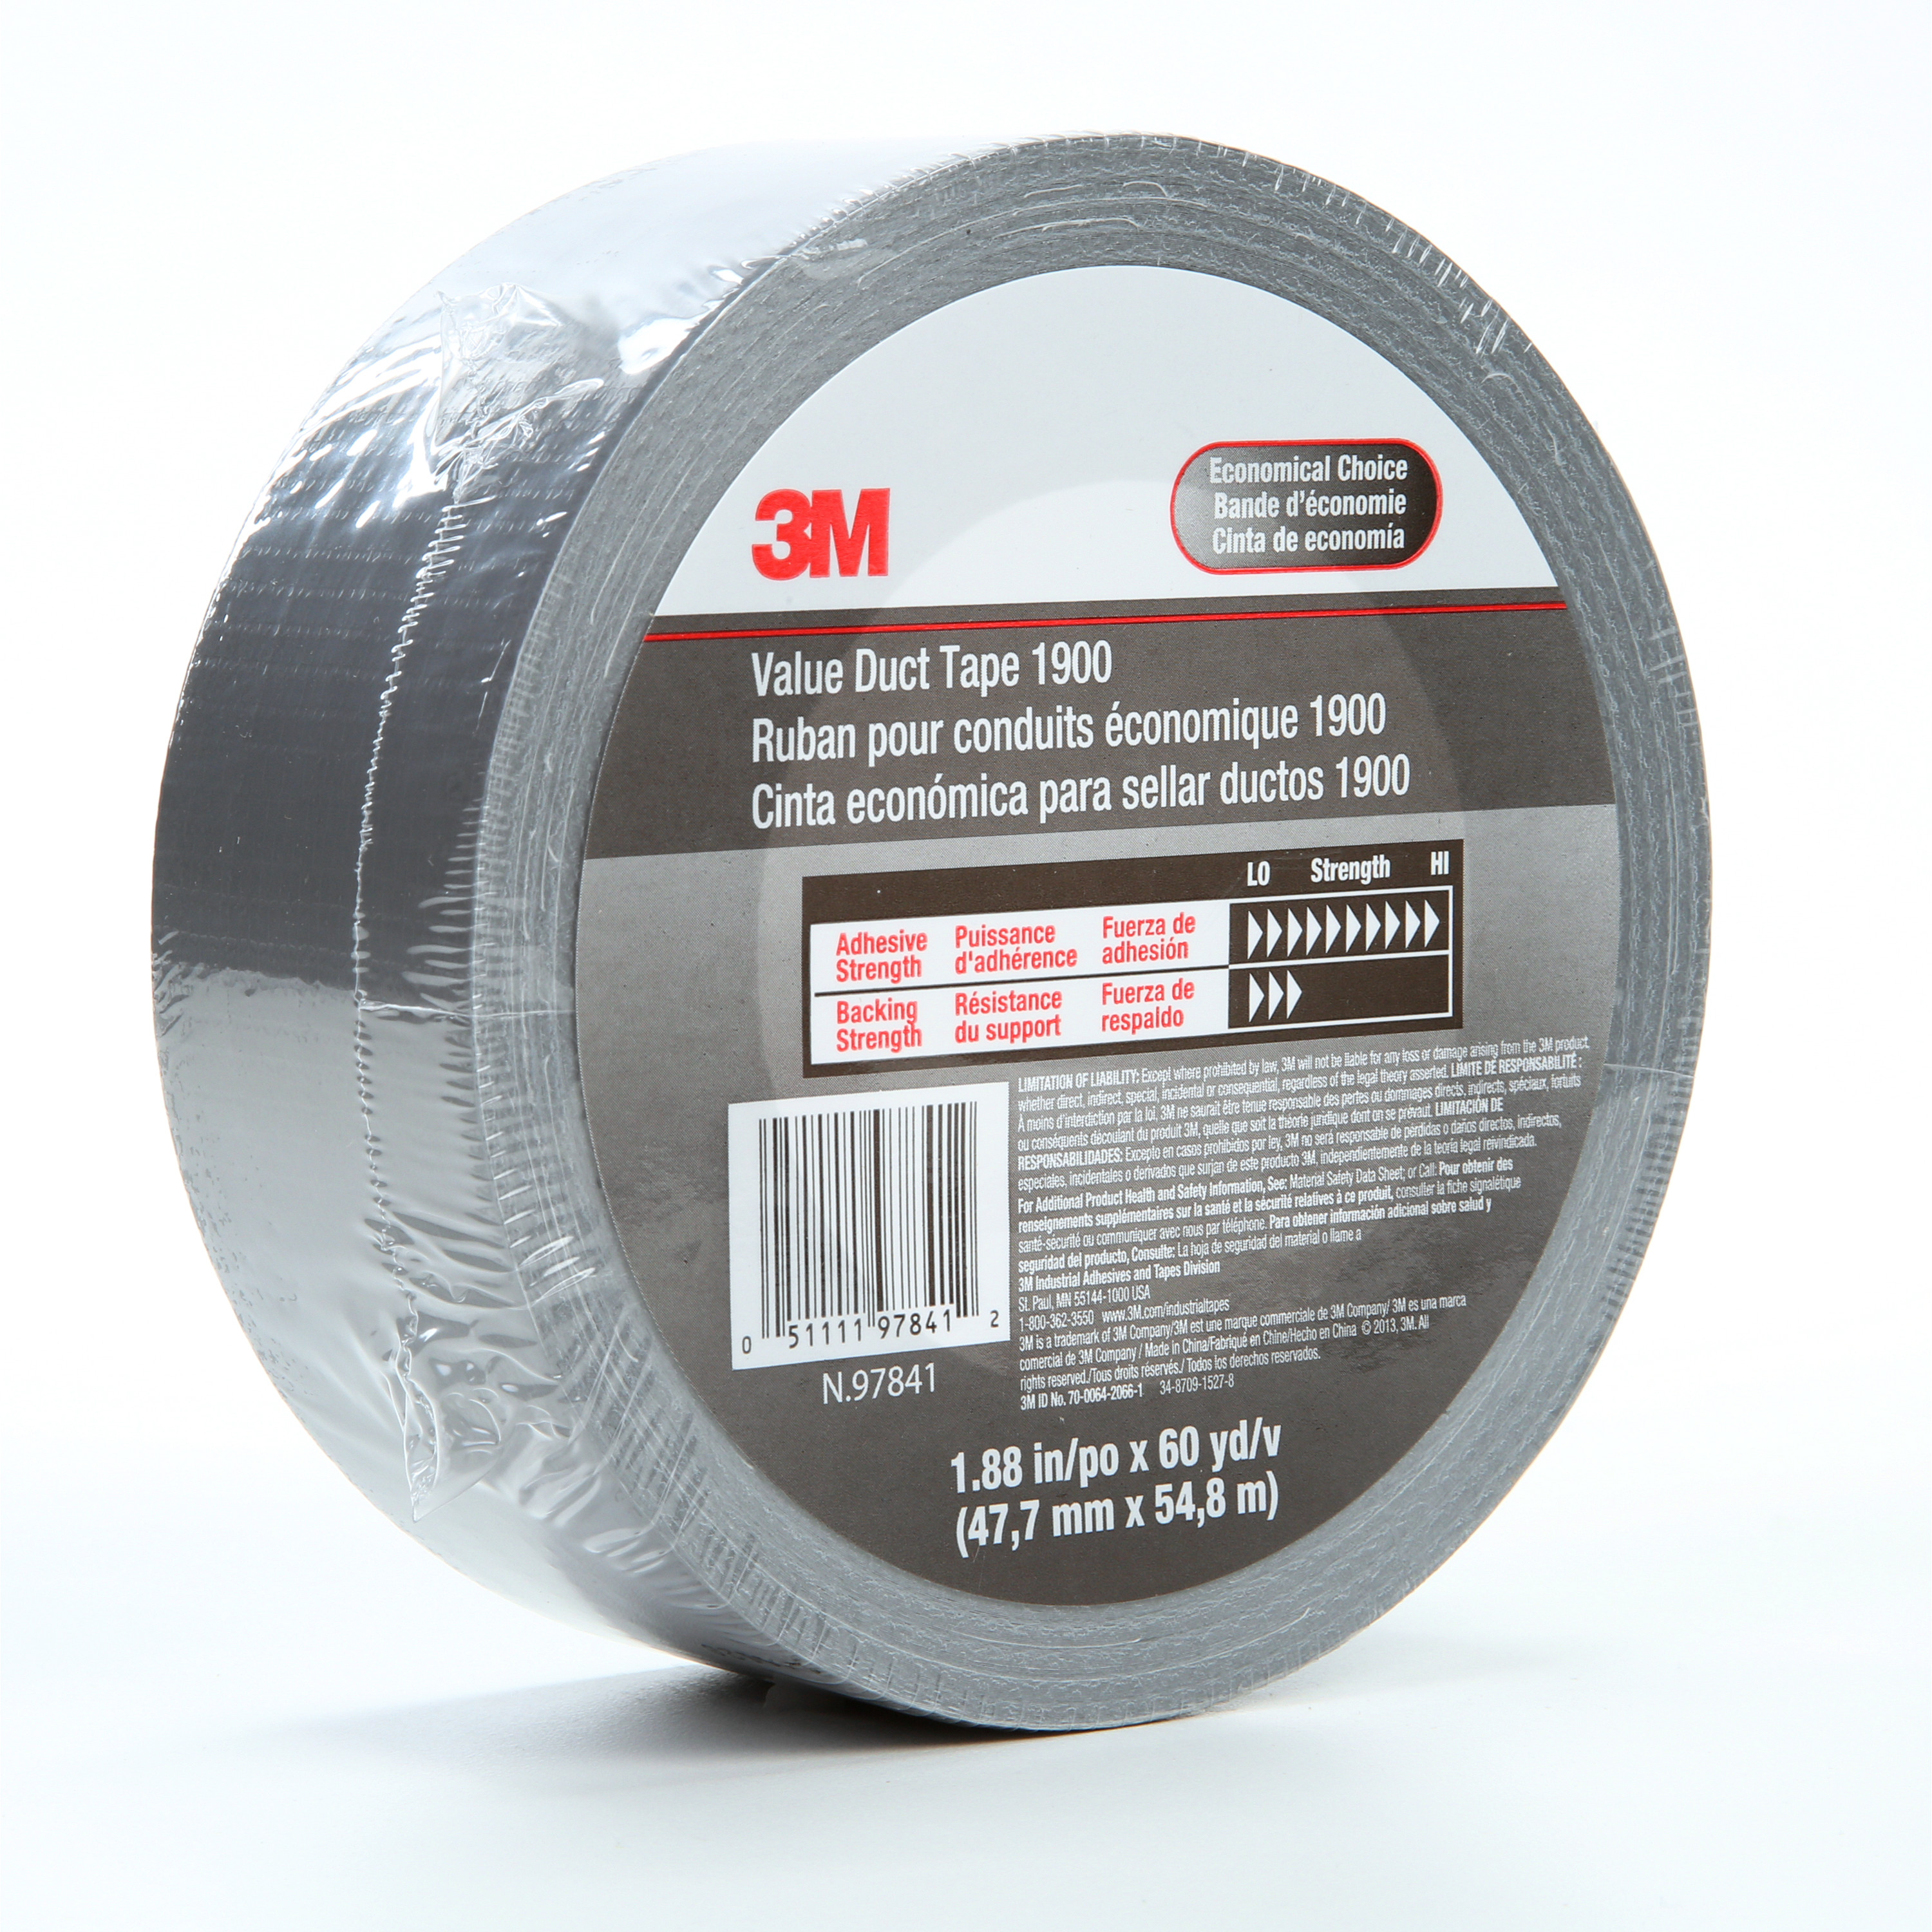 3M™ Value Duct Tape 1900, Silver, 1.88 in x 60 yd, 5.8 mil, 24 per case,
Individually Wrapped Conveniently Packaged